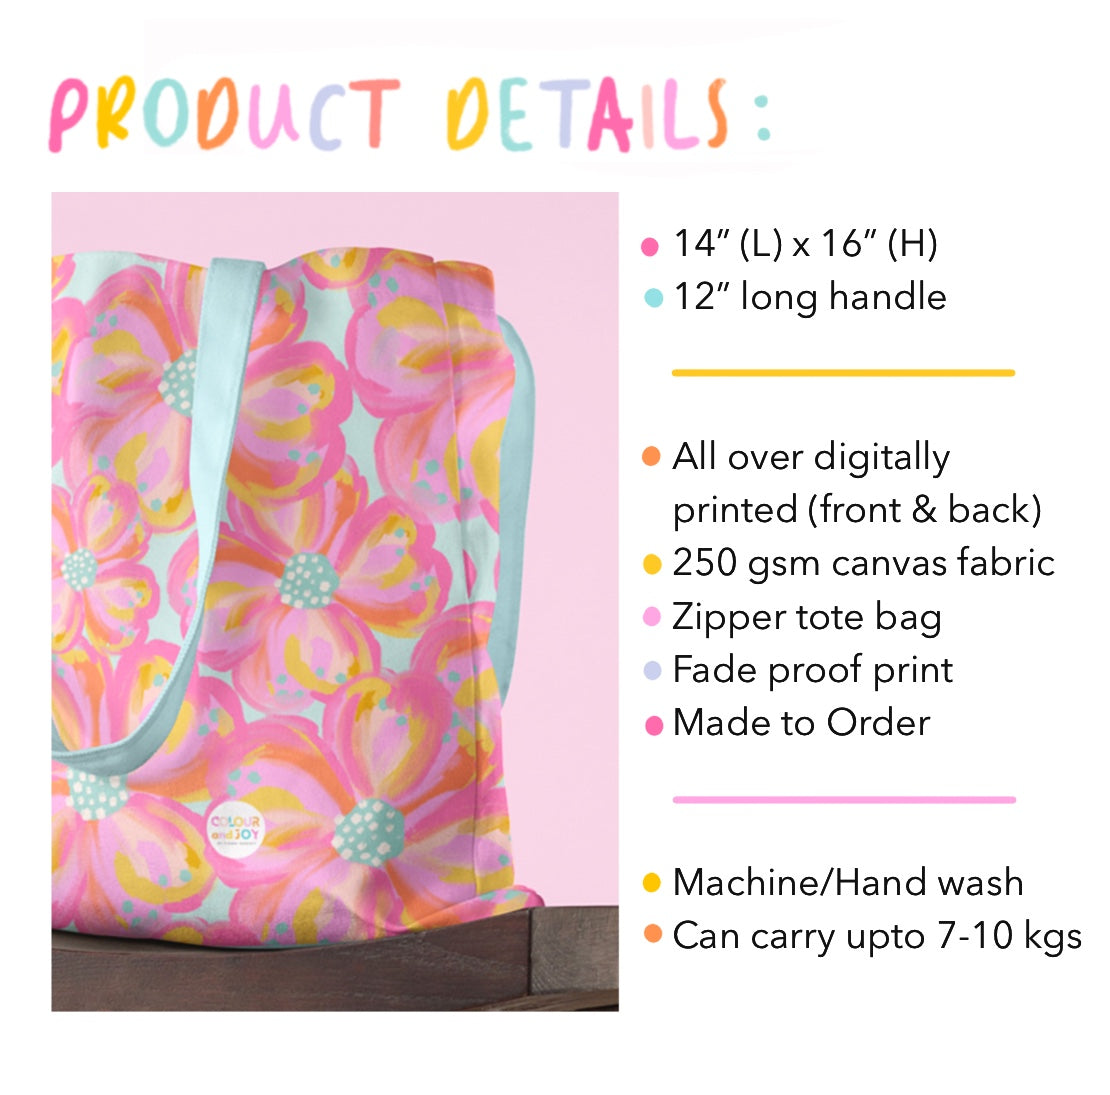 Floral Fusion - All over printed zipper tote